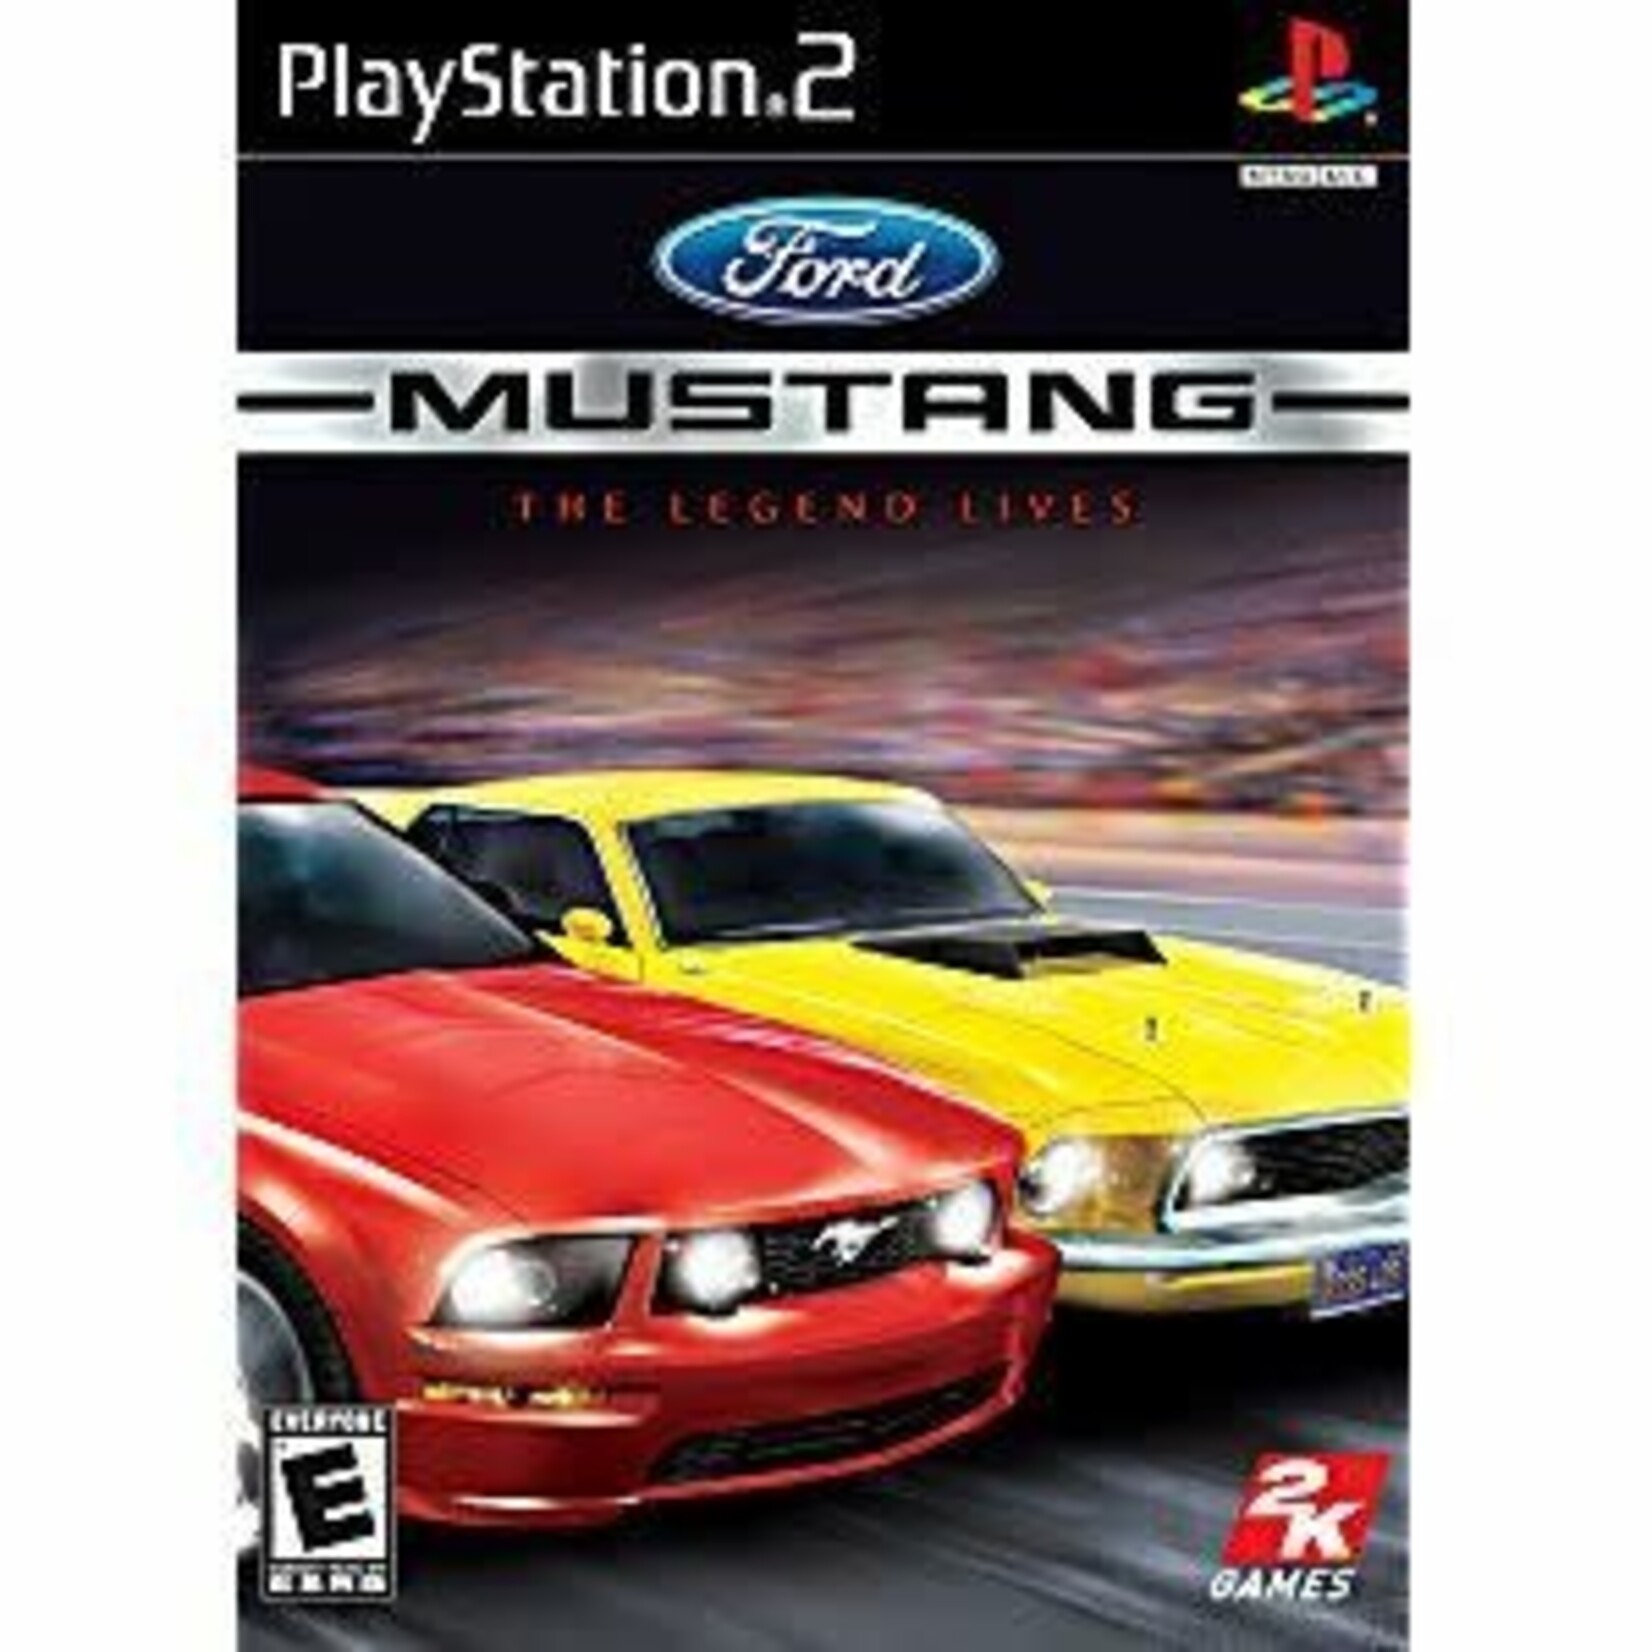 PS2U-FORD MUSTANG